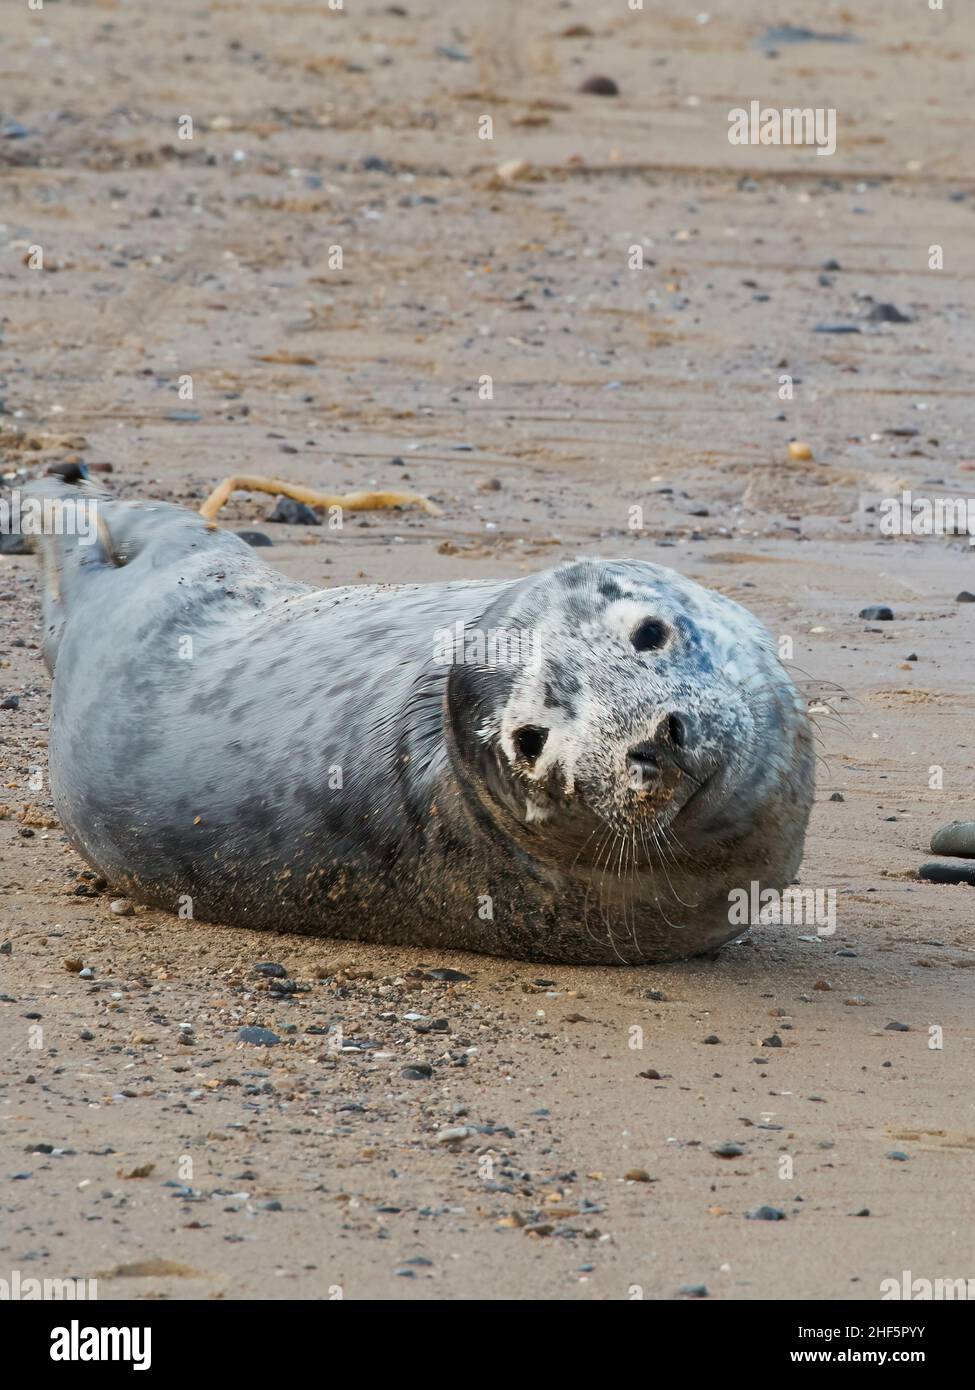 A young, underweight seal hauled out on Redcar beach, resting after battling the waves of a storm-tossed North Sea. Stock Photo